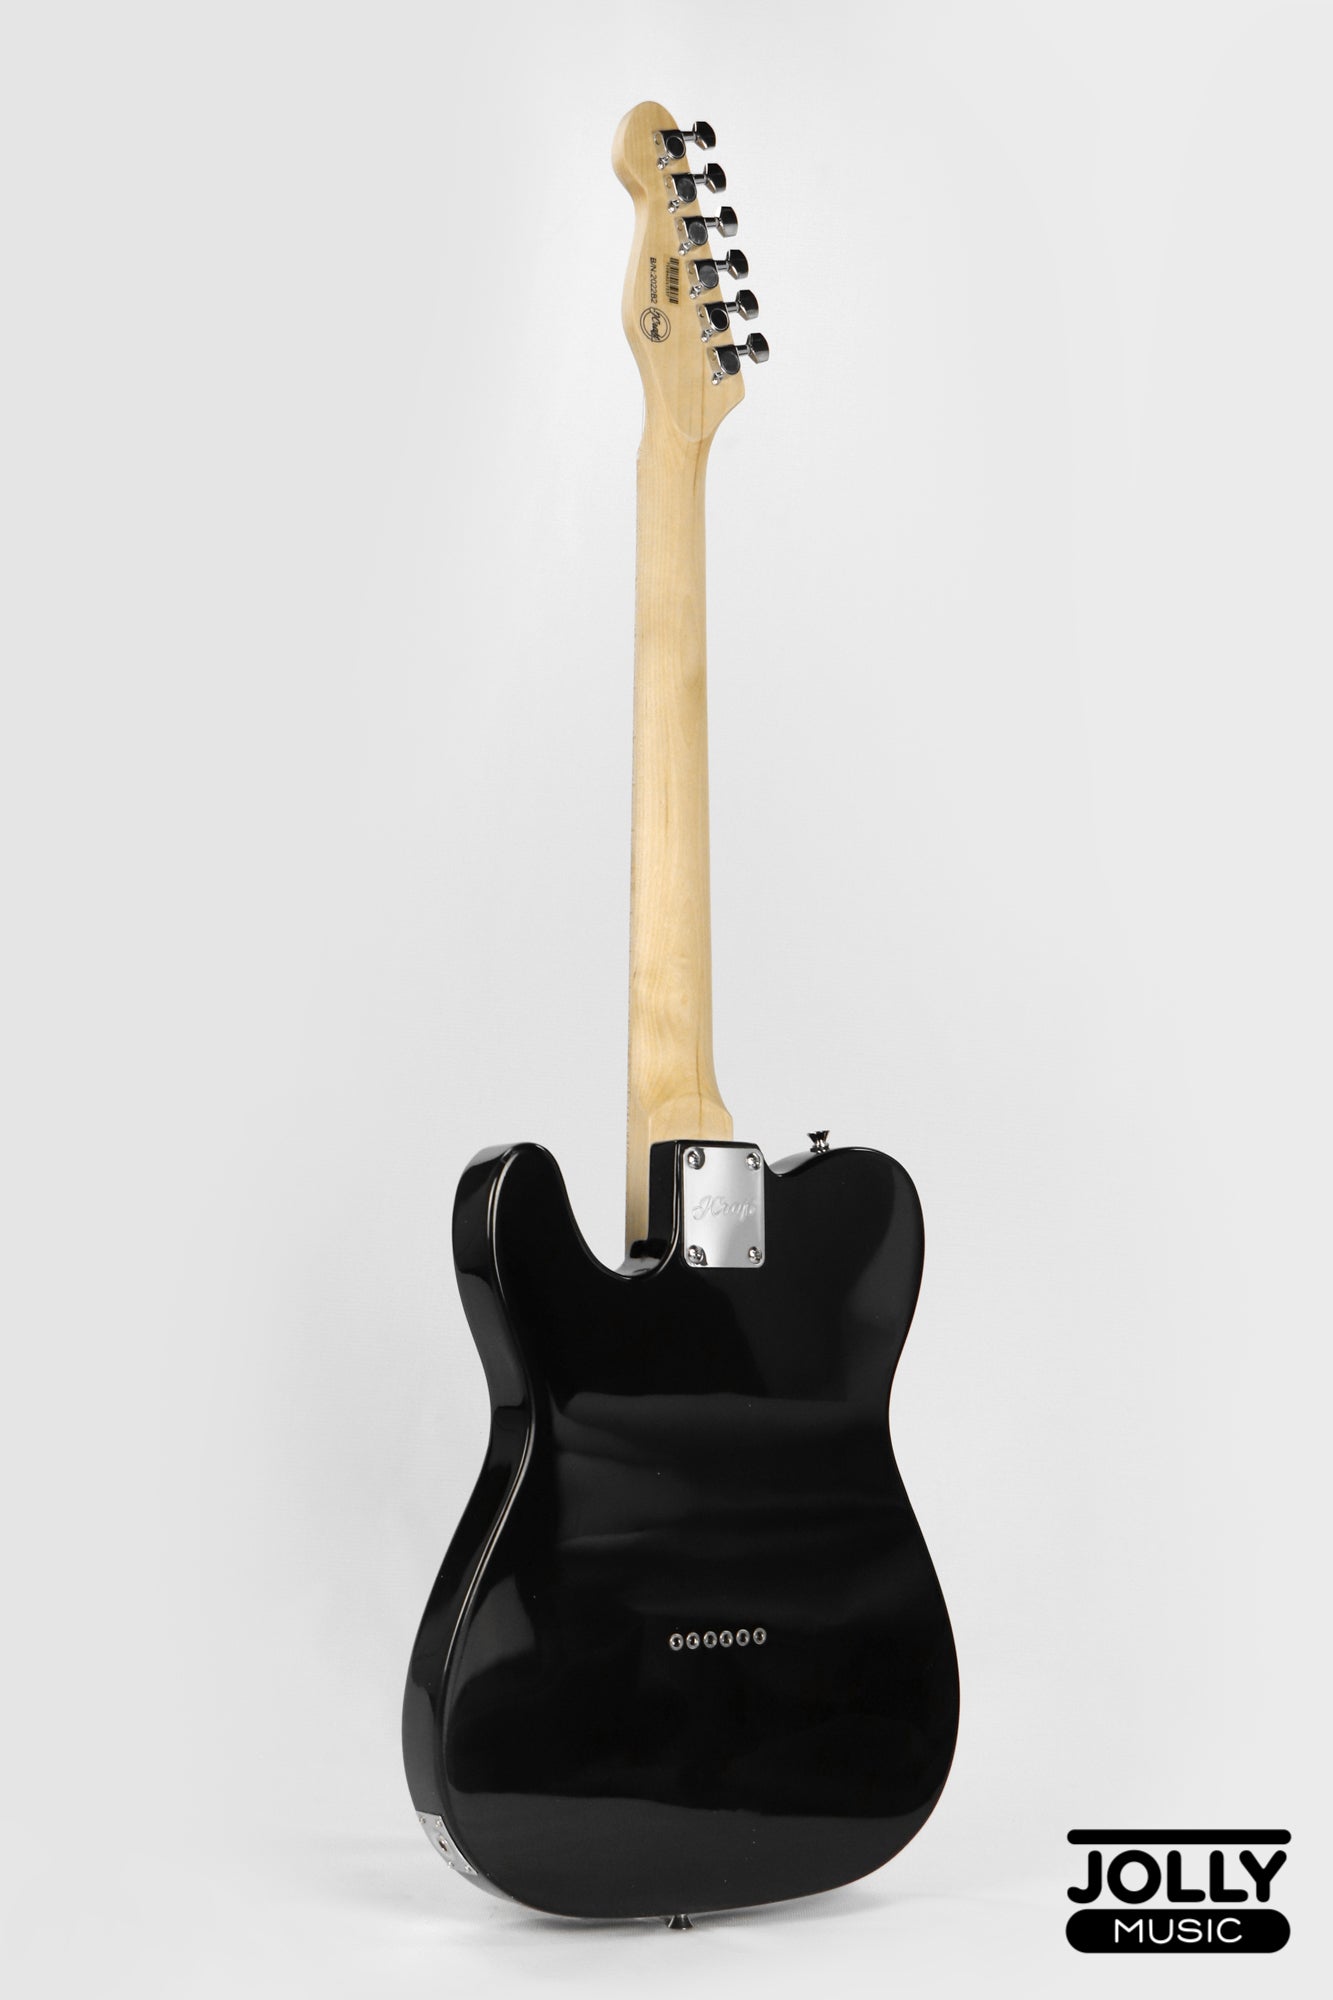 JCraft T-1 T-Style Electric Guitar with Gigbag - Black